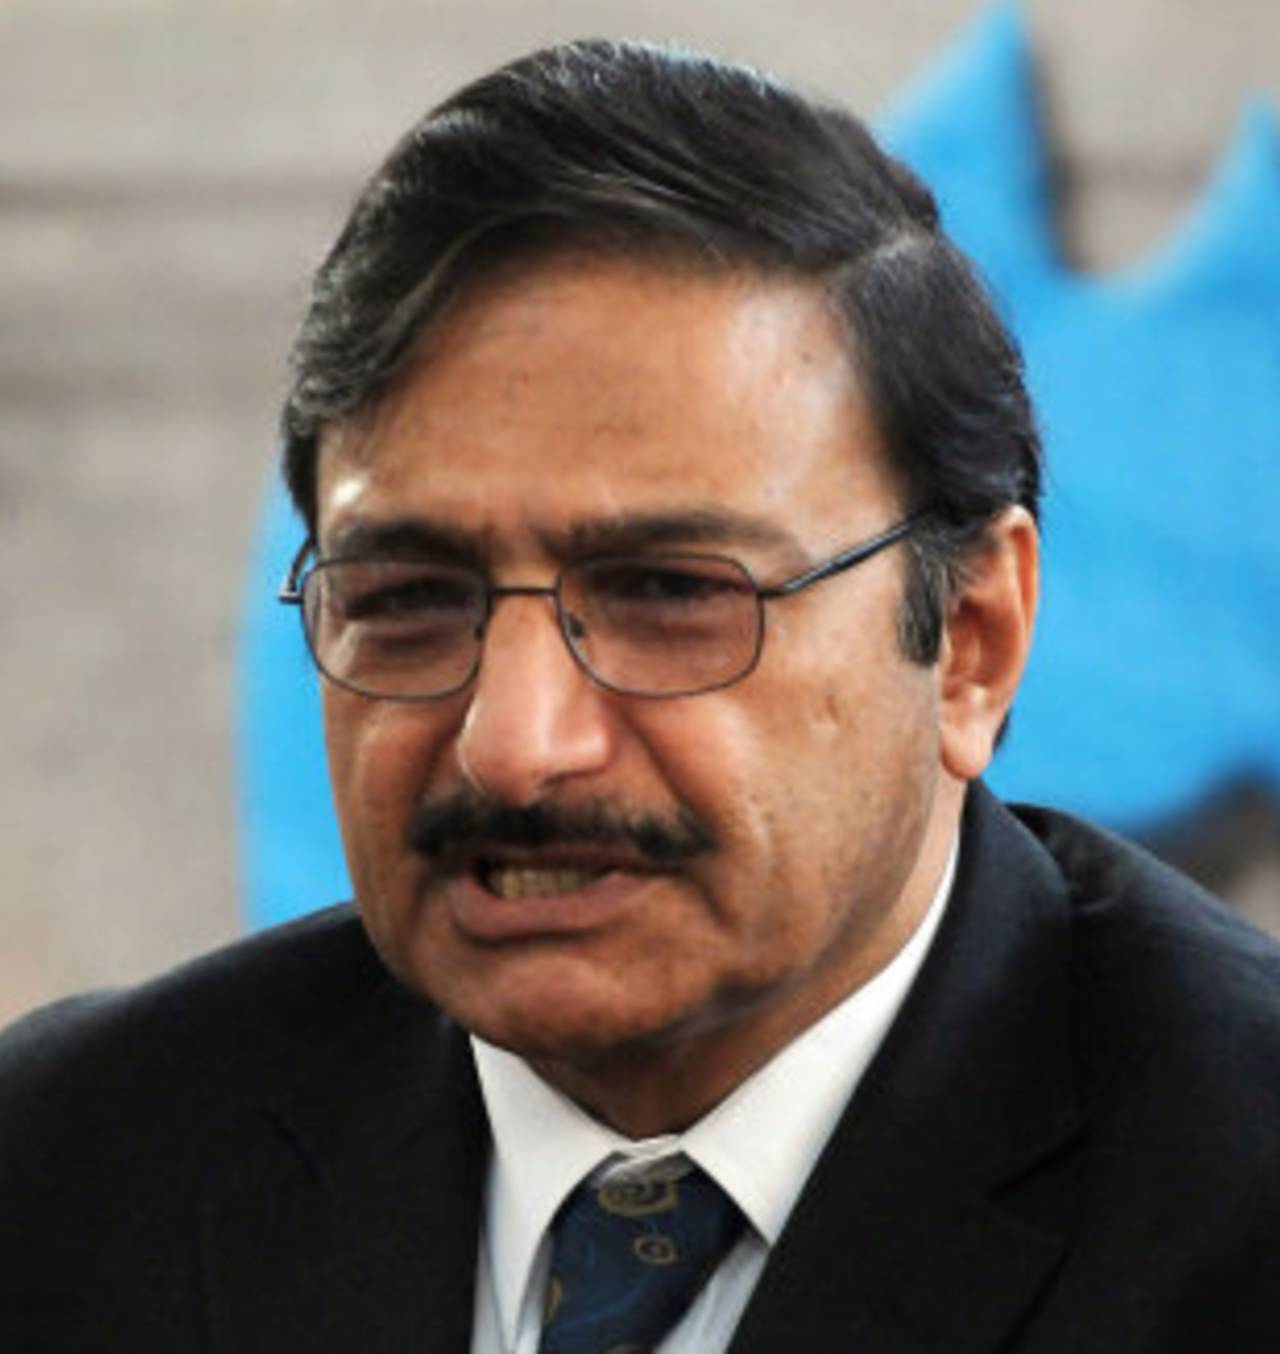 Zaka Ashraf plans to speak to the BCCI during his visit on the chances of India playing host to the Australia series&nbsp;&nbsp;&bull;&nbsp;&nbsp;AFP